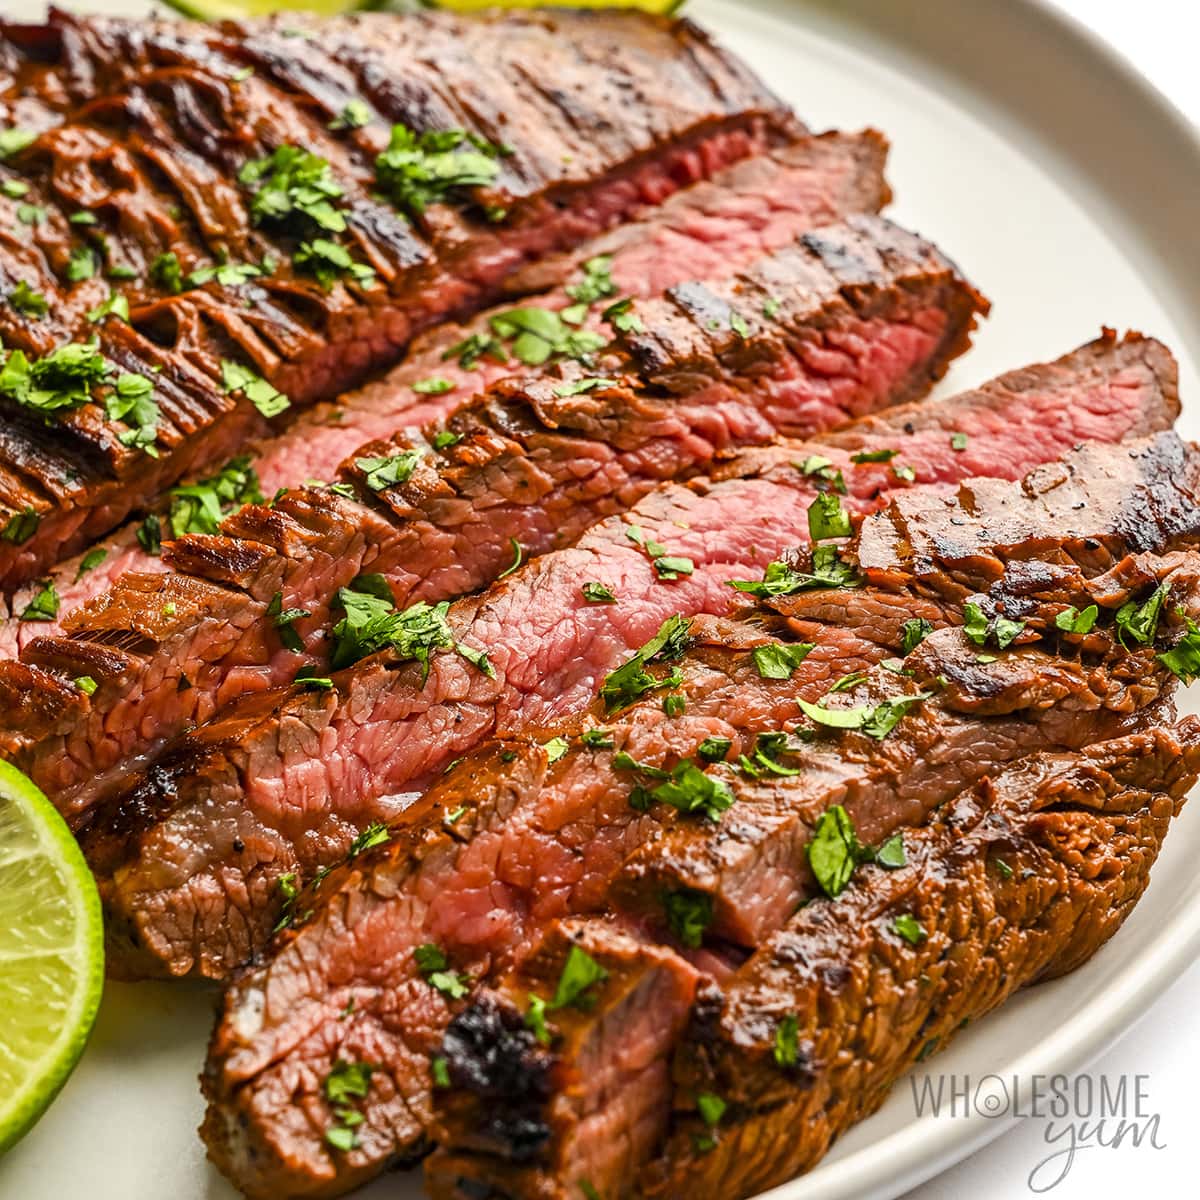 Learn how to cook flank steak like this.